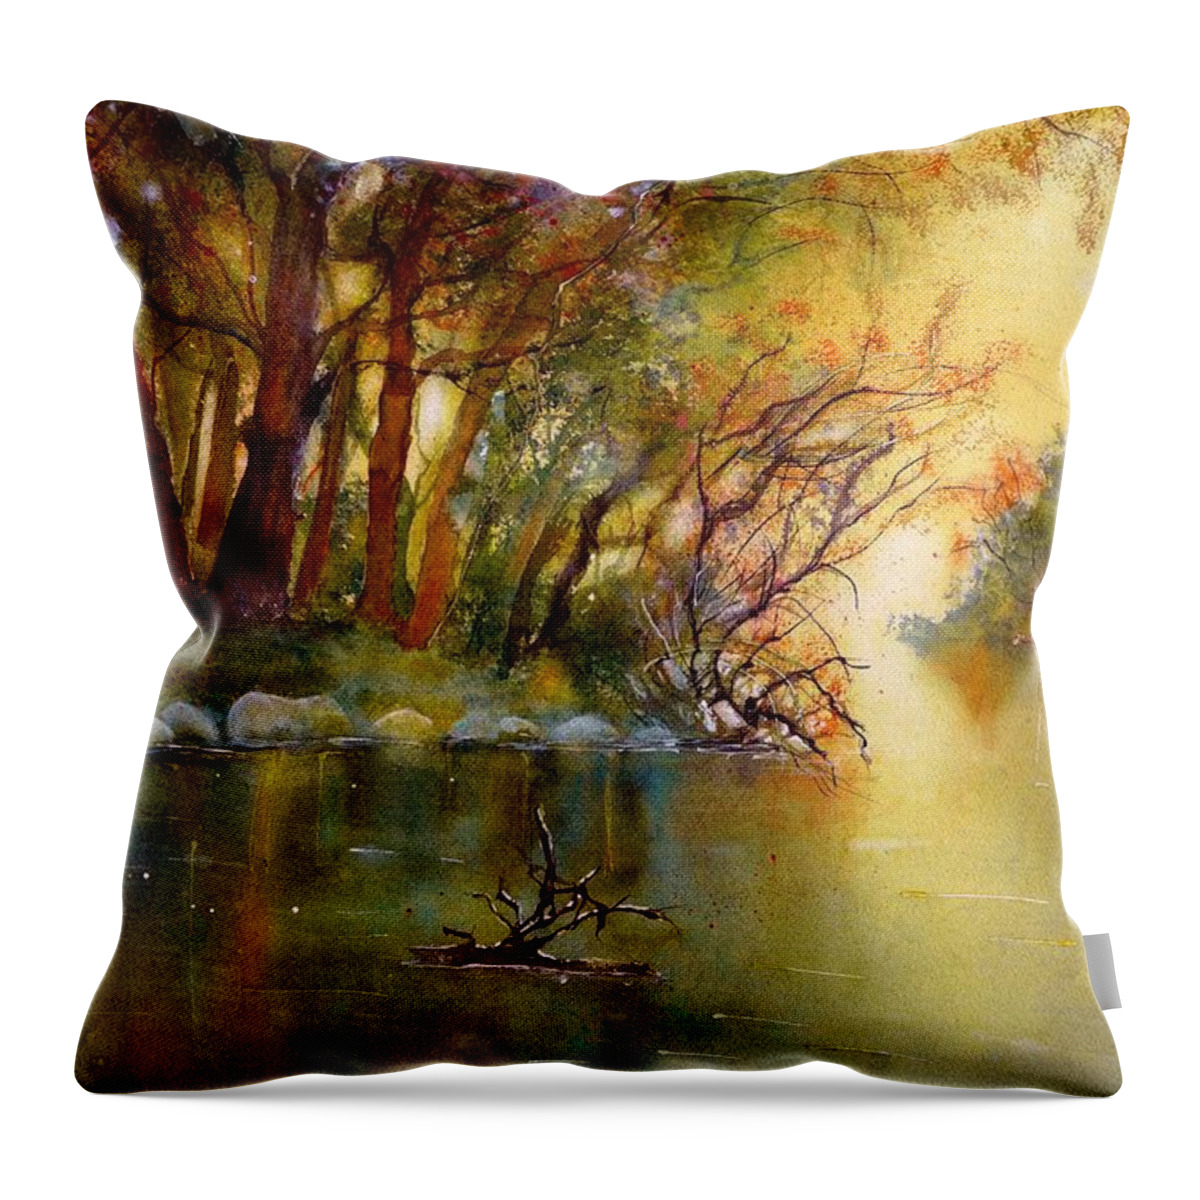 Autumn Landscape Throw Pillow featuring the painting River Rhine in Autumn by Sabina Von Arx